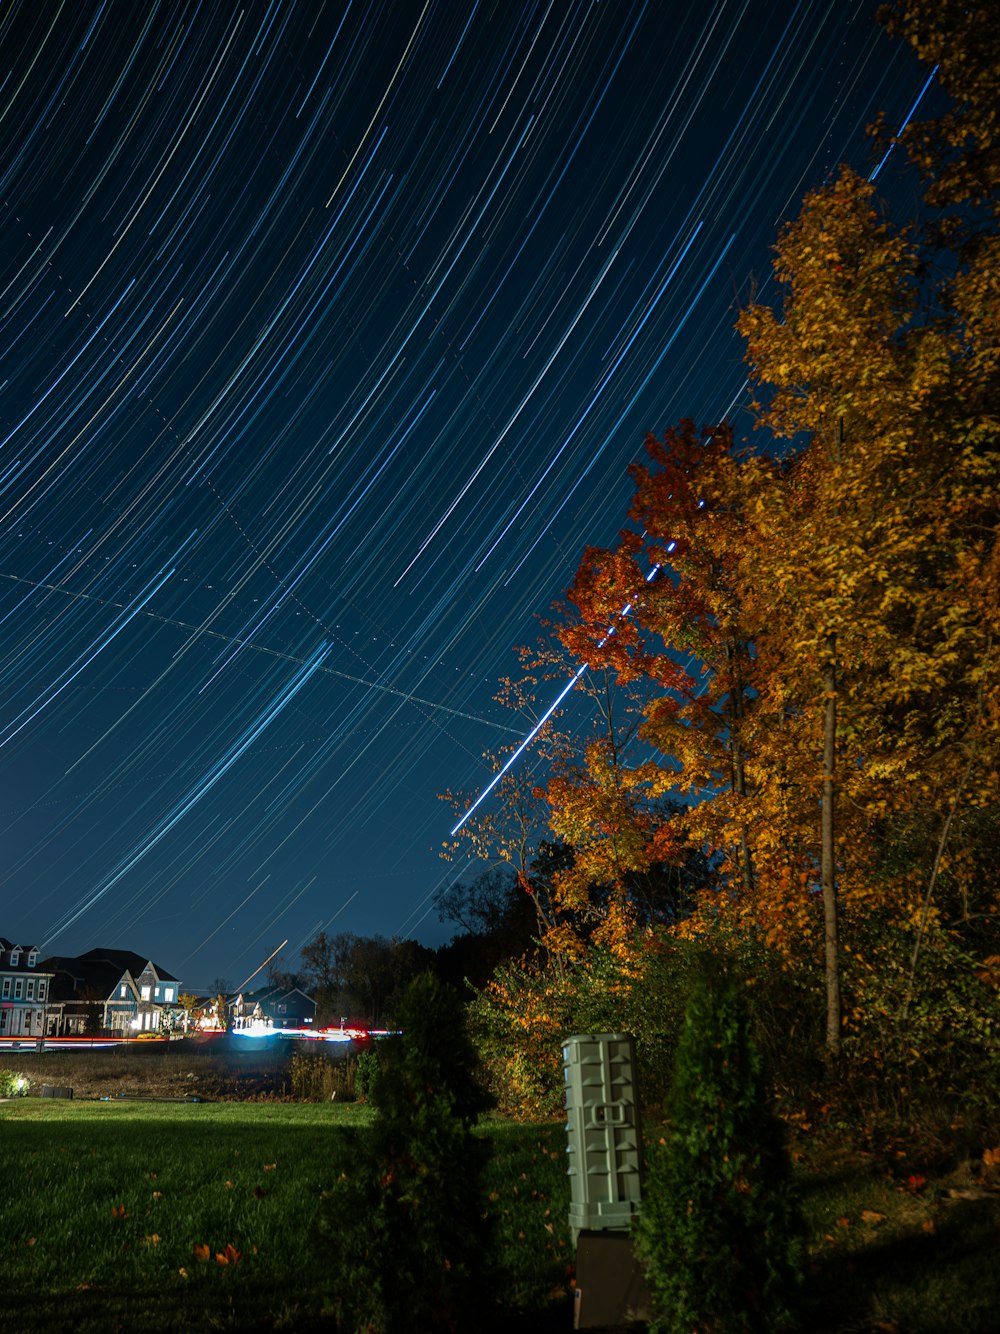 the night sky with a star trail in the background